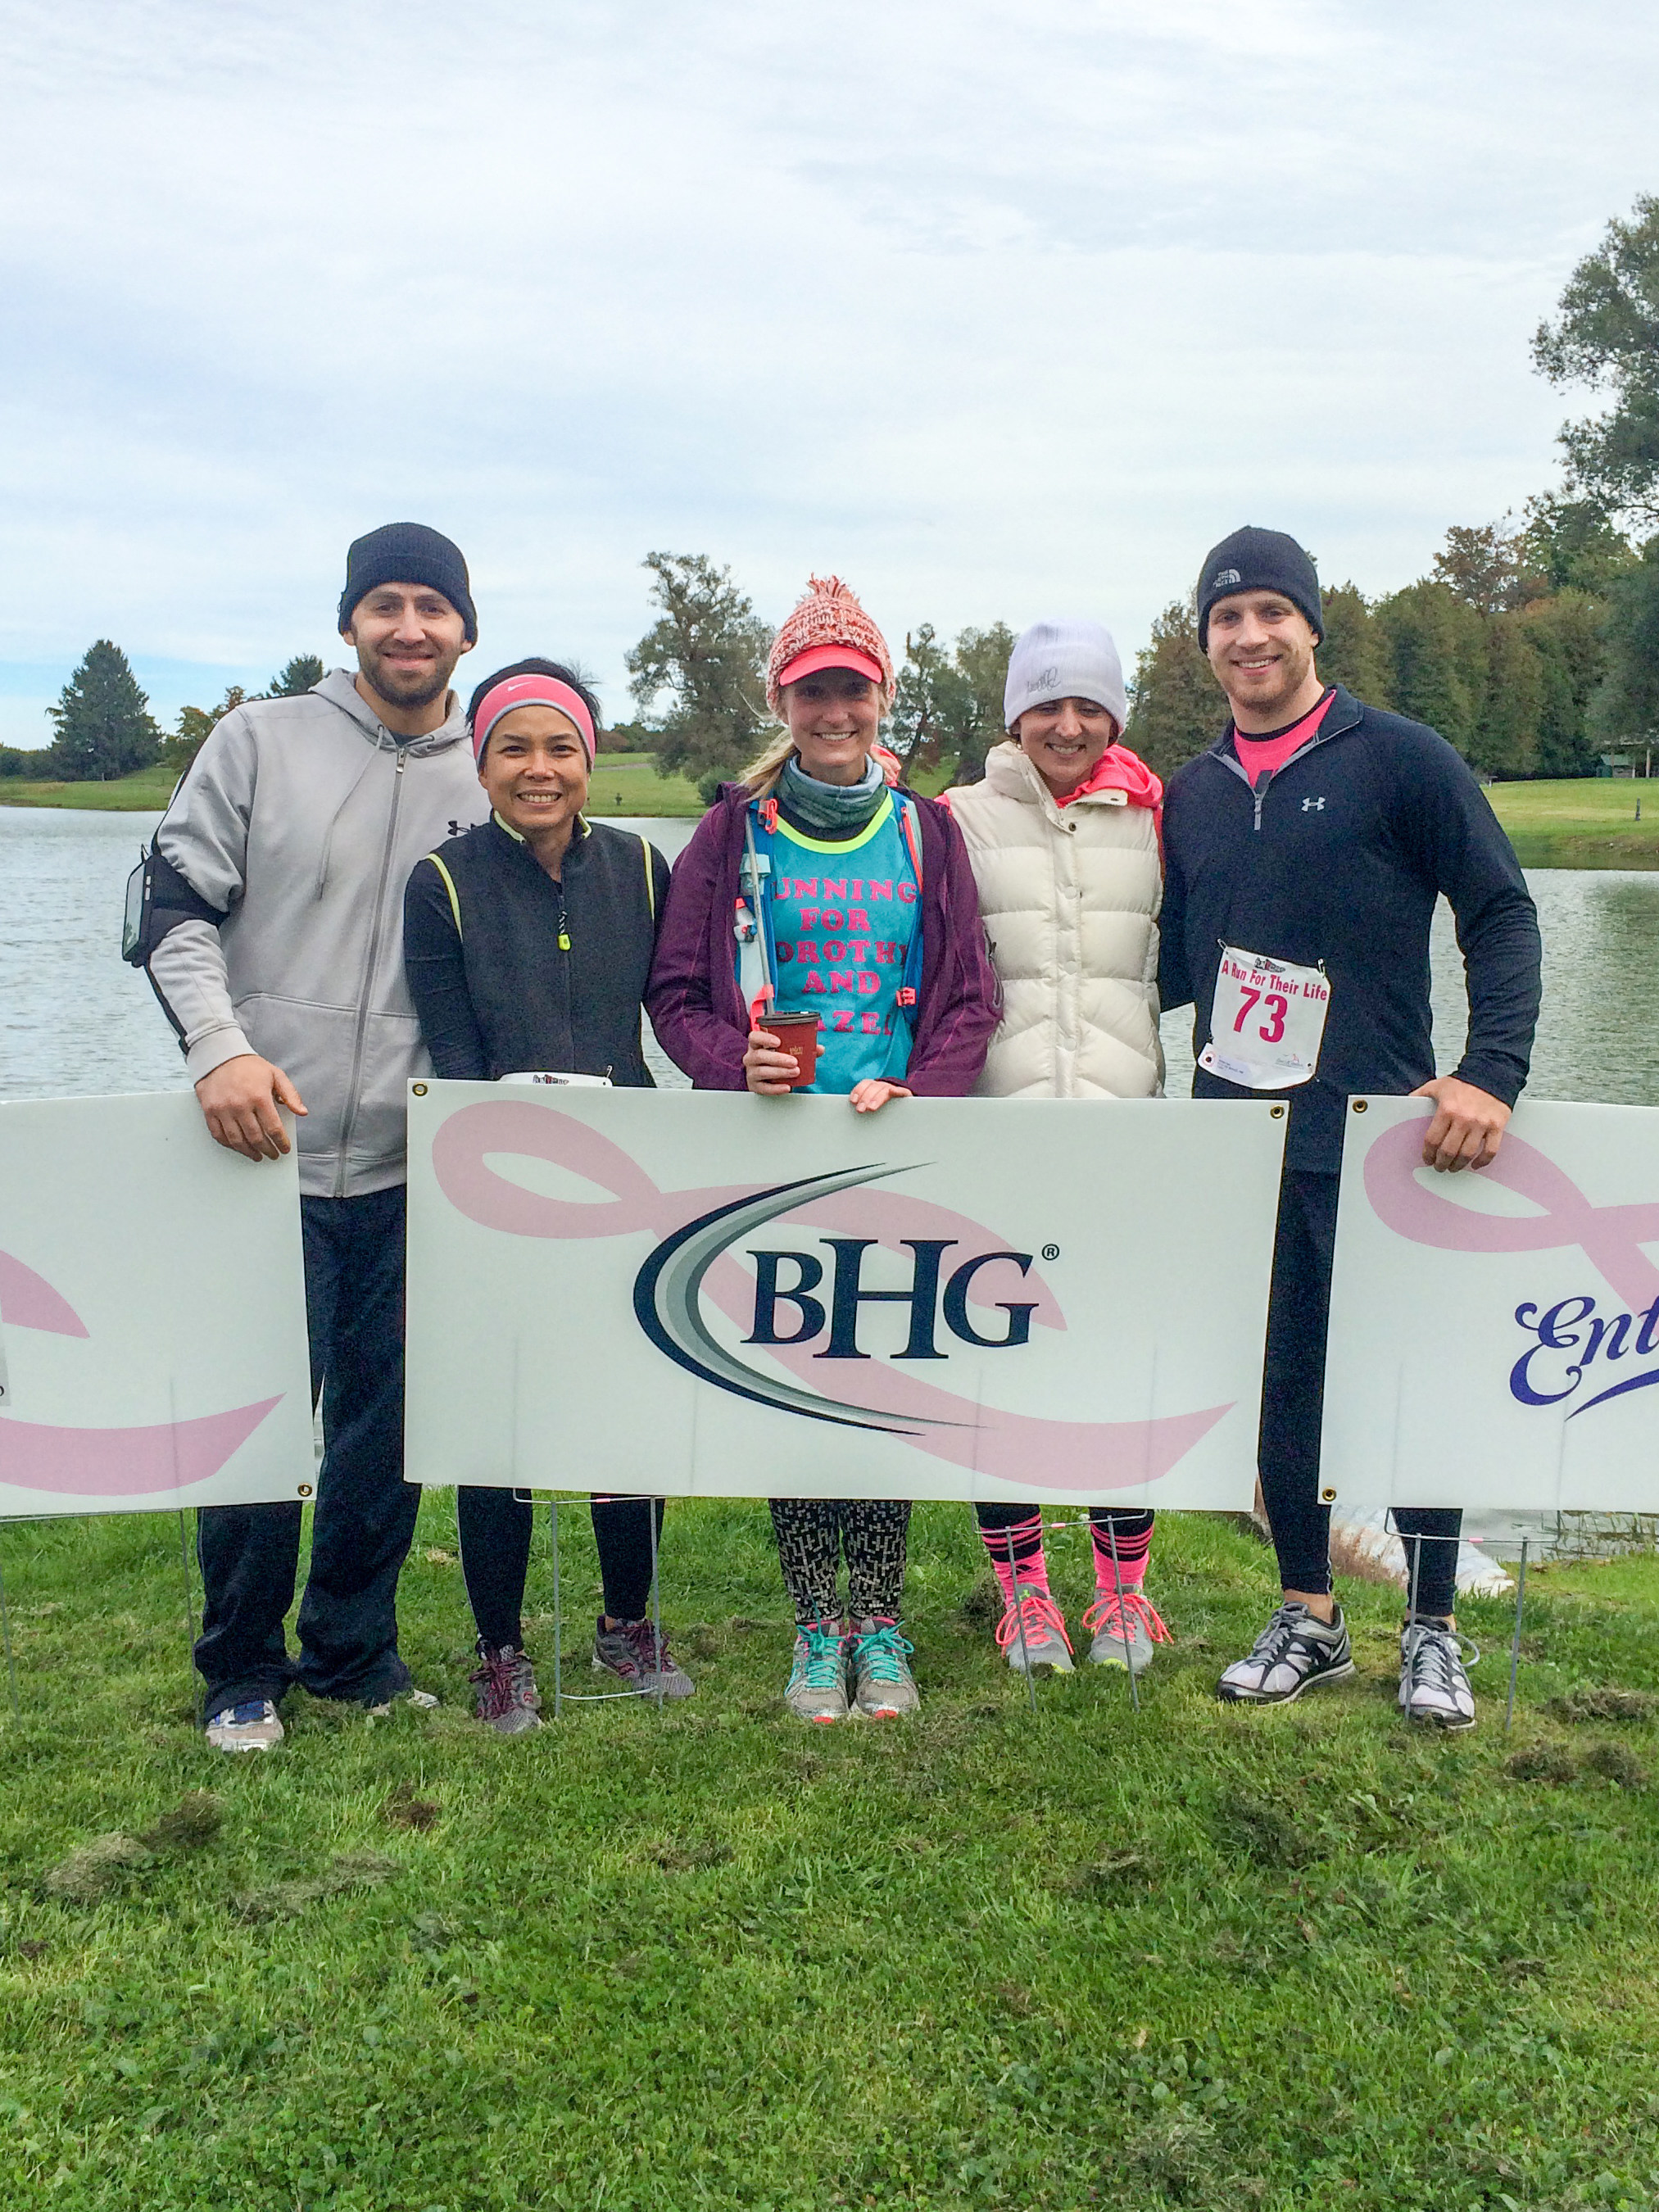 A team of Bankers Healthcare Group employees participated in A Run for Their Life on October 3, 2015 at the Camillus Veterans Memorial Park to benefit the Carol M. Baldwin Breast Cancer Research Fund of Central New York.